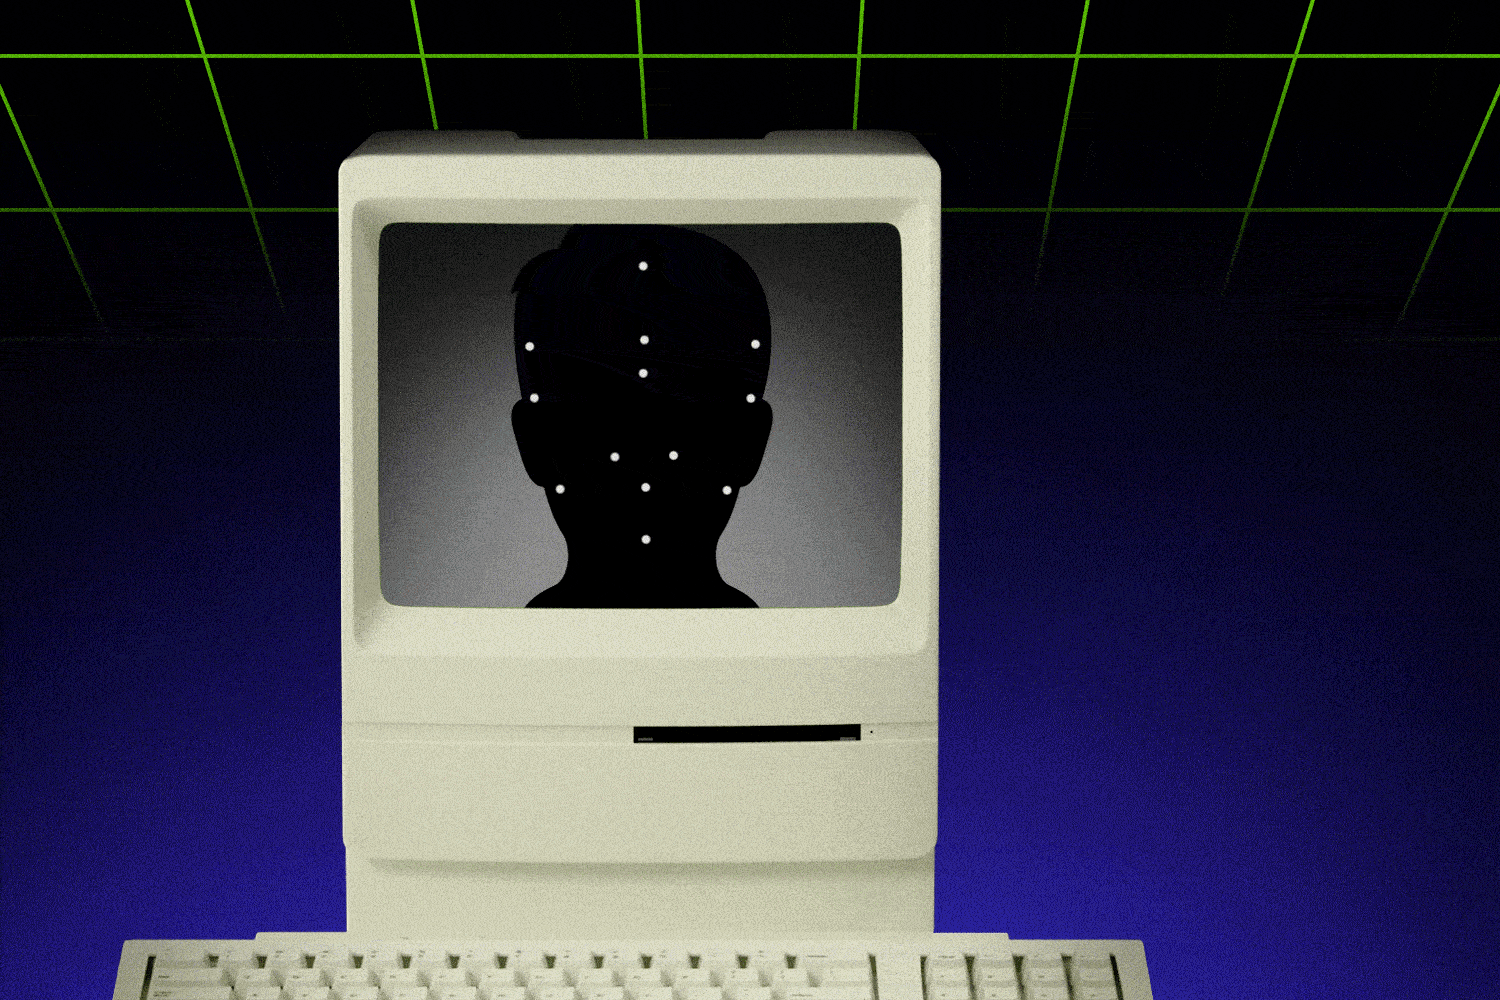 A retro computer scanning someone’s face to verify their identity